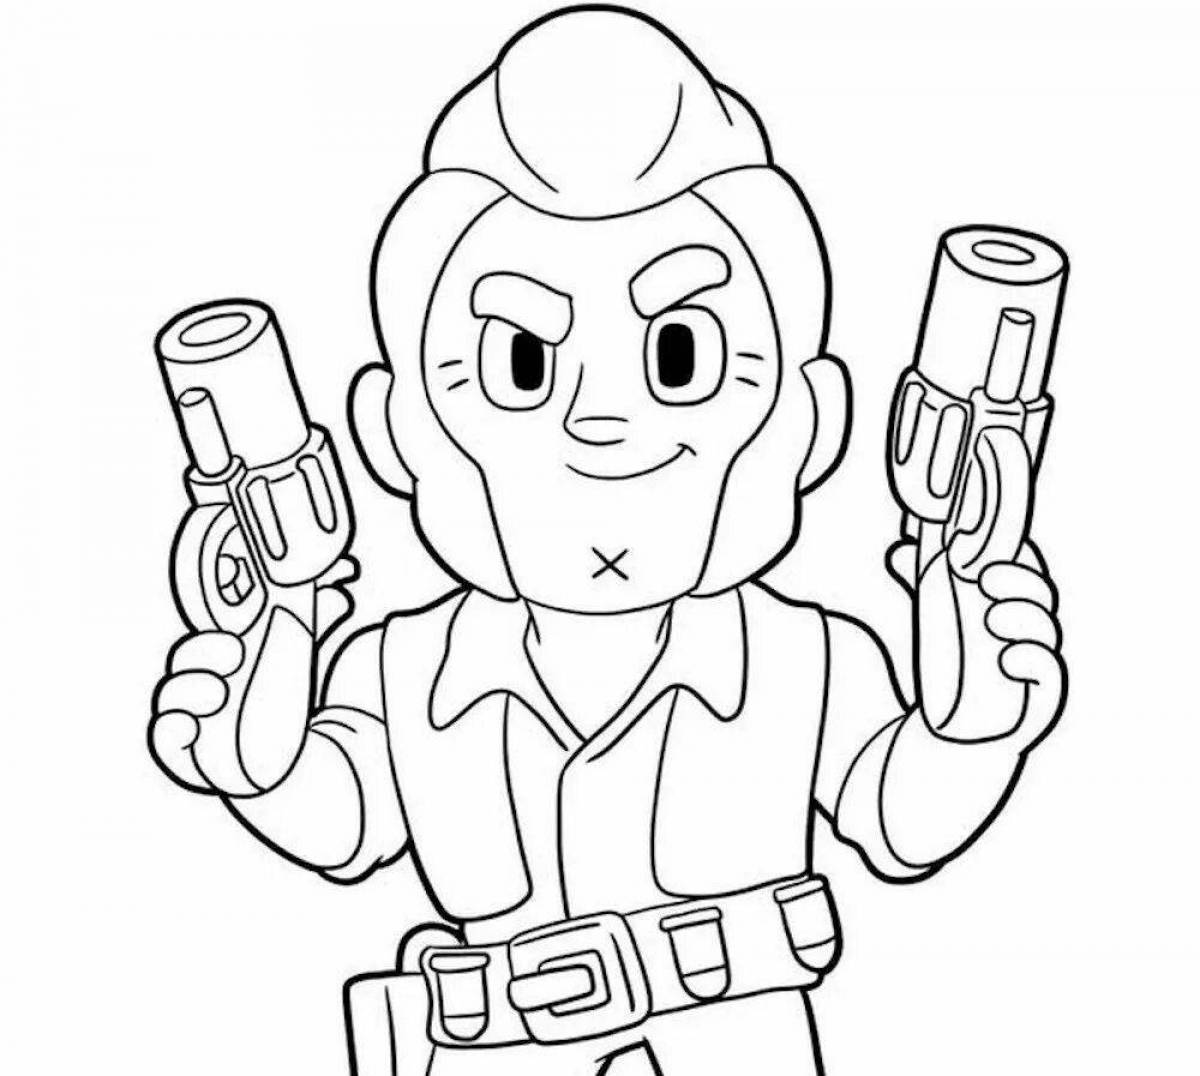 Colorful colt coloring book